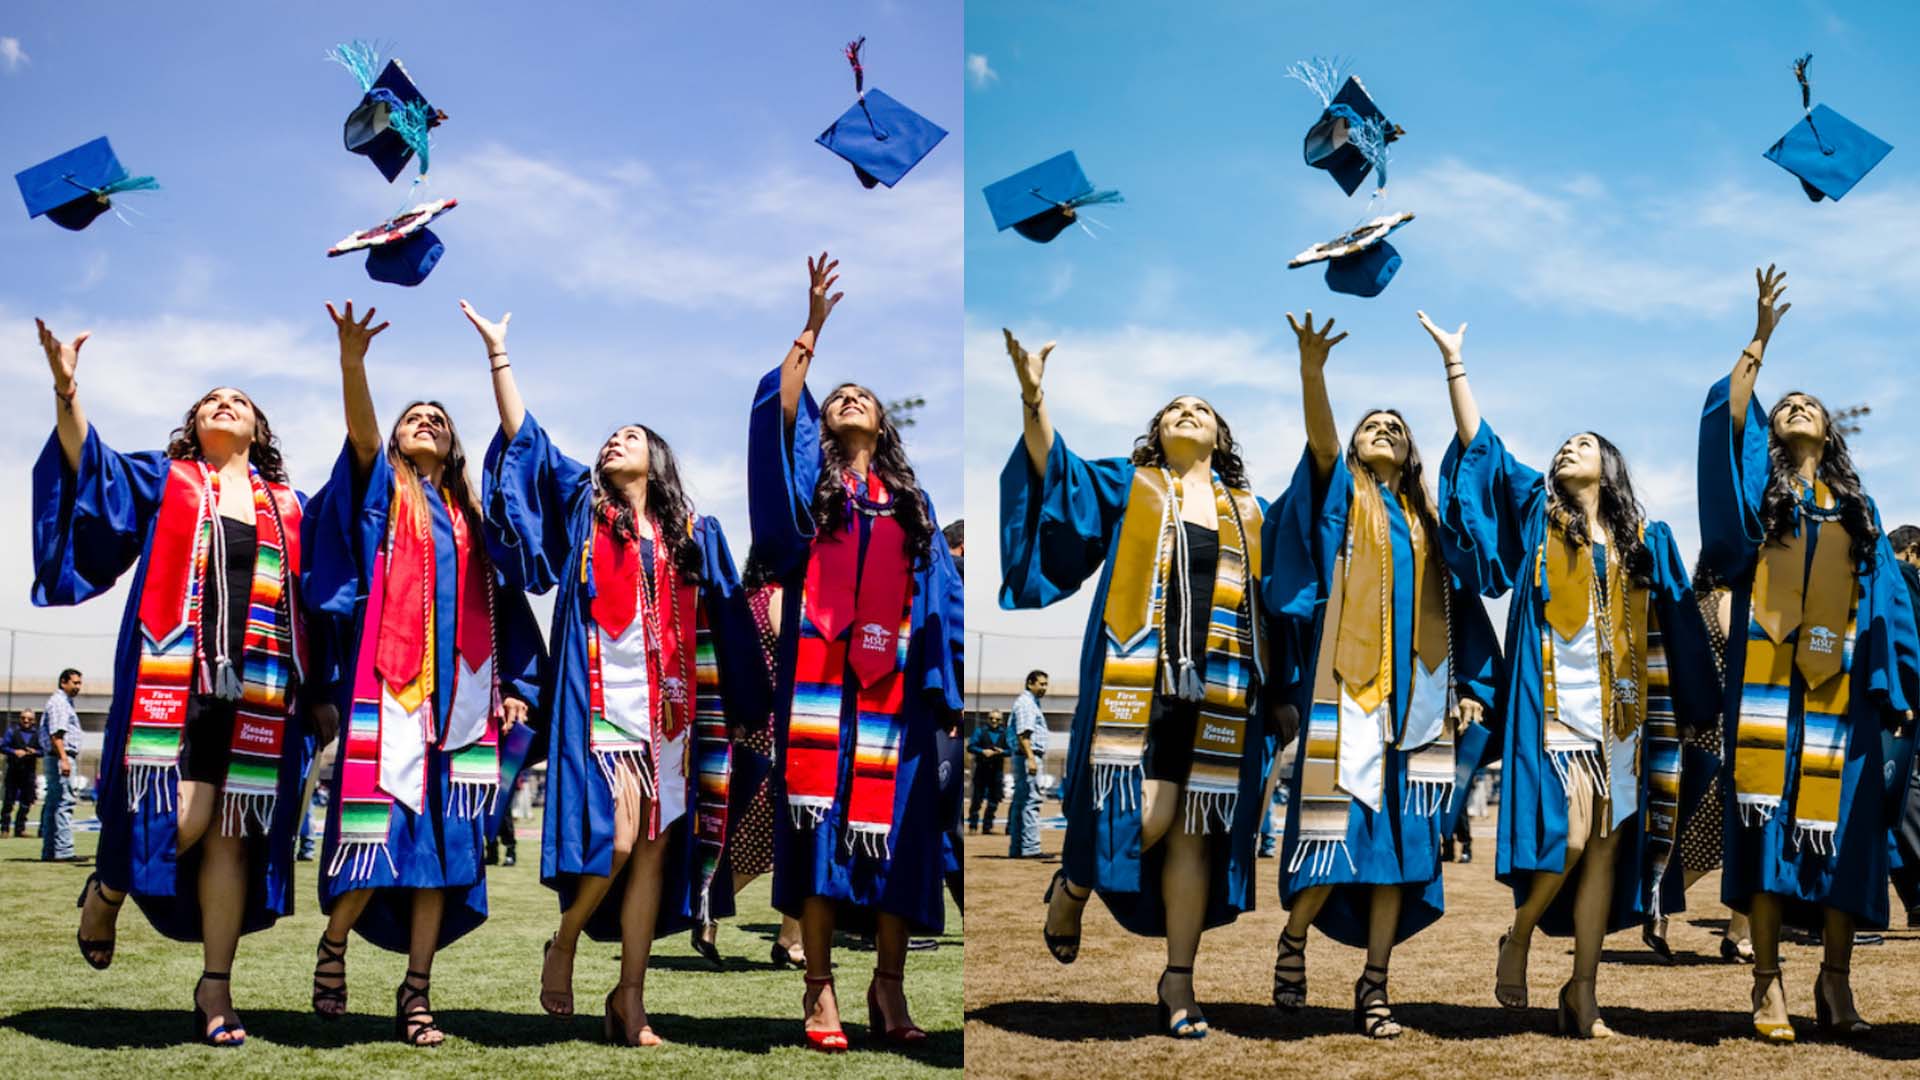 A normal color vision and color blind view of graduates tossing caps